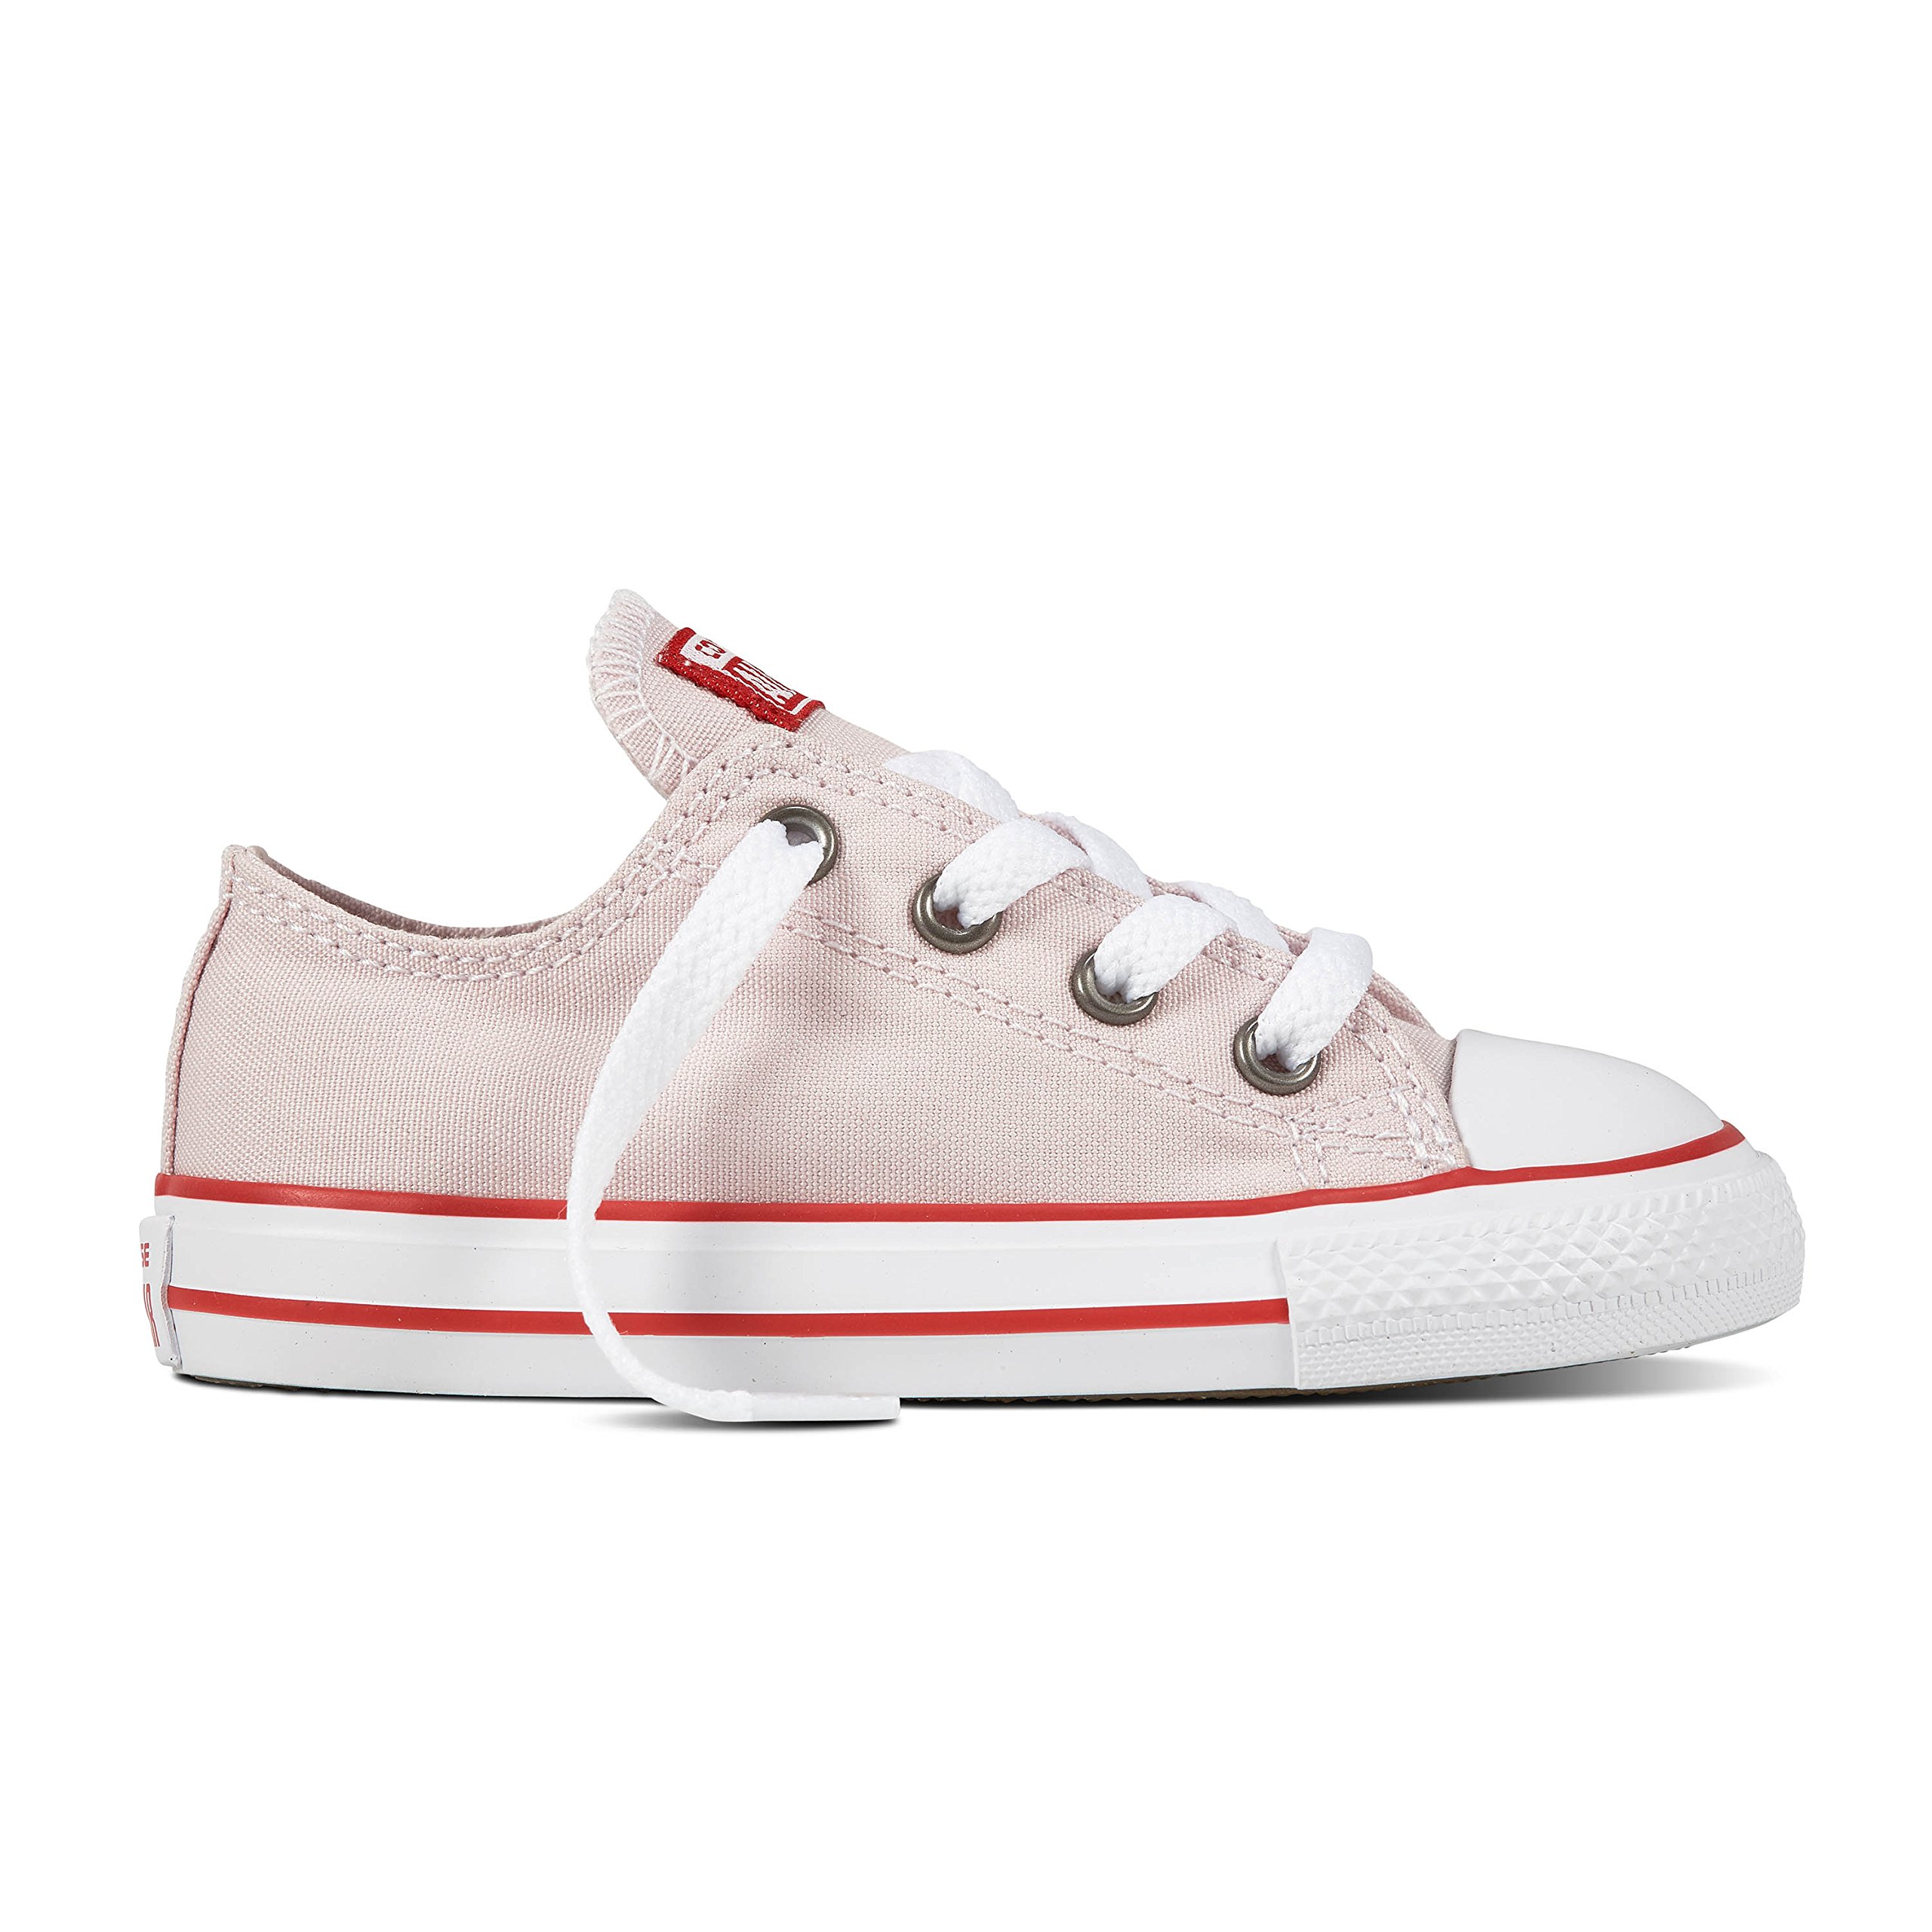 Converse Kids Baby Girl's Chuck Taylor All Star Ox (Infant/Toddler) Barely Rose/Enamel Red/White 5 Toddler M